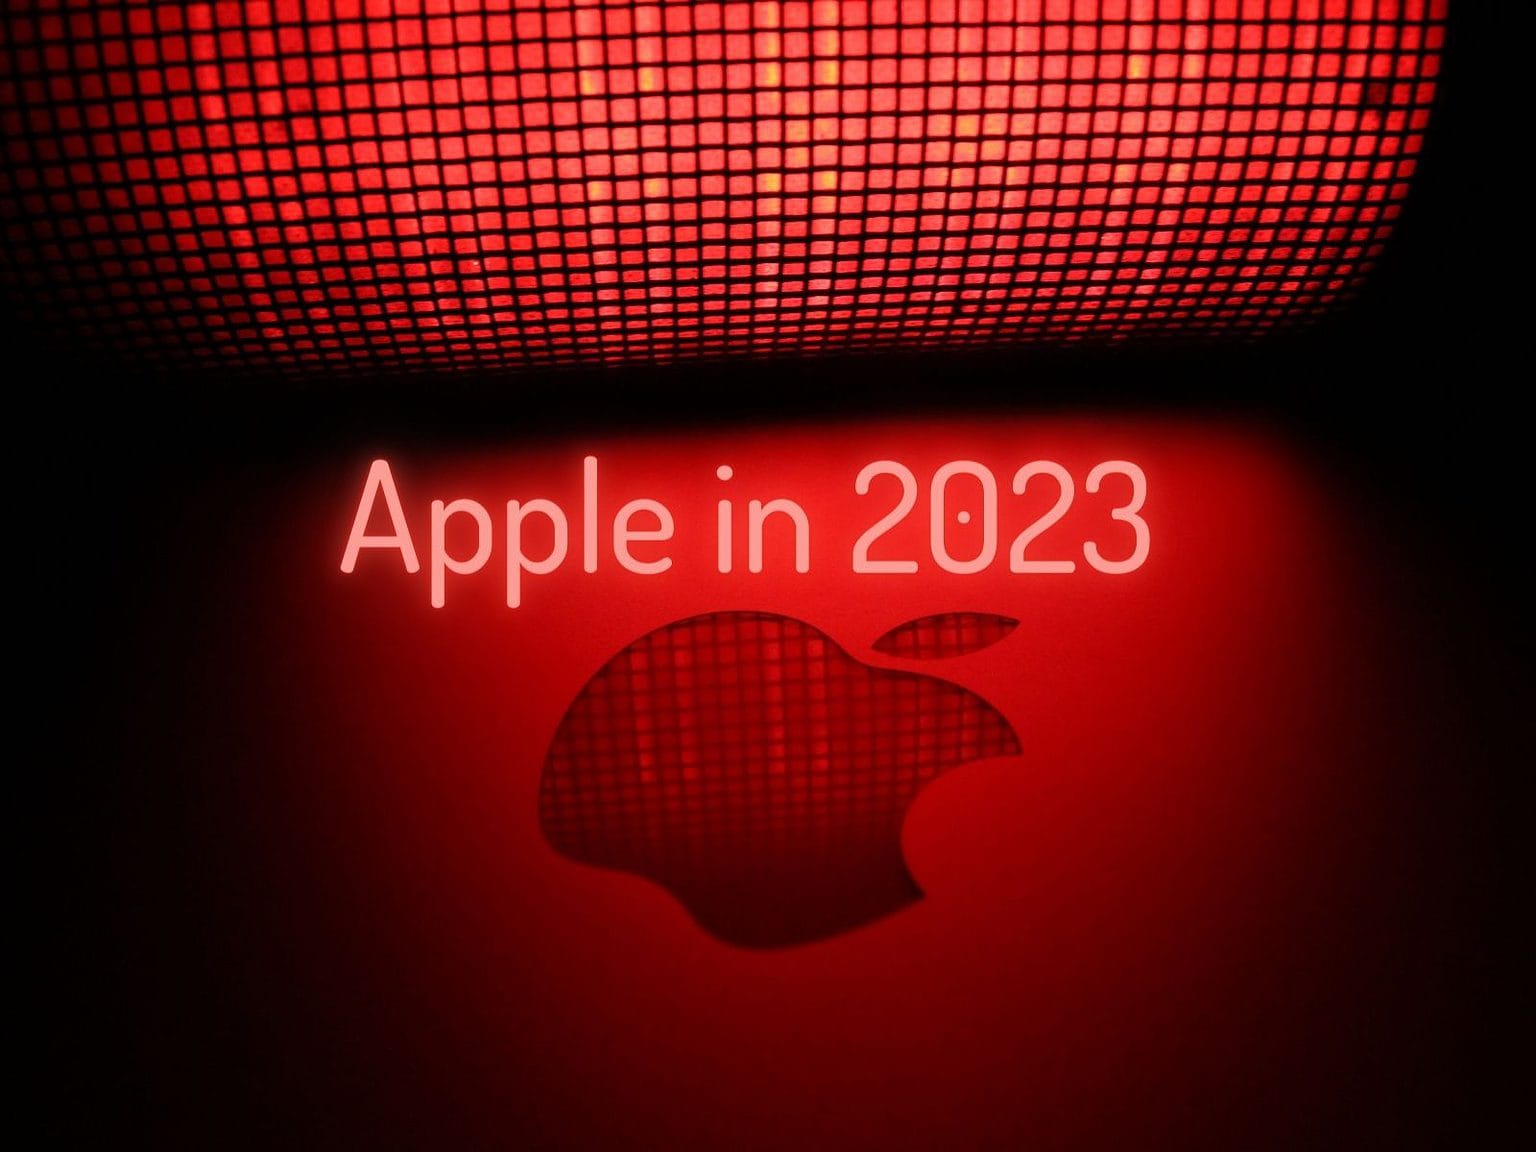 Apple logo with red background.